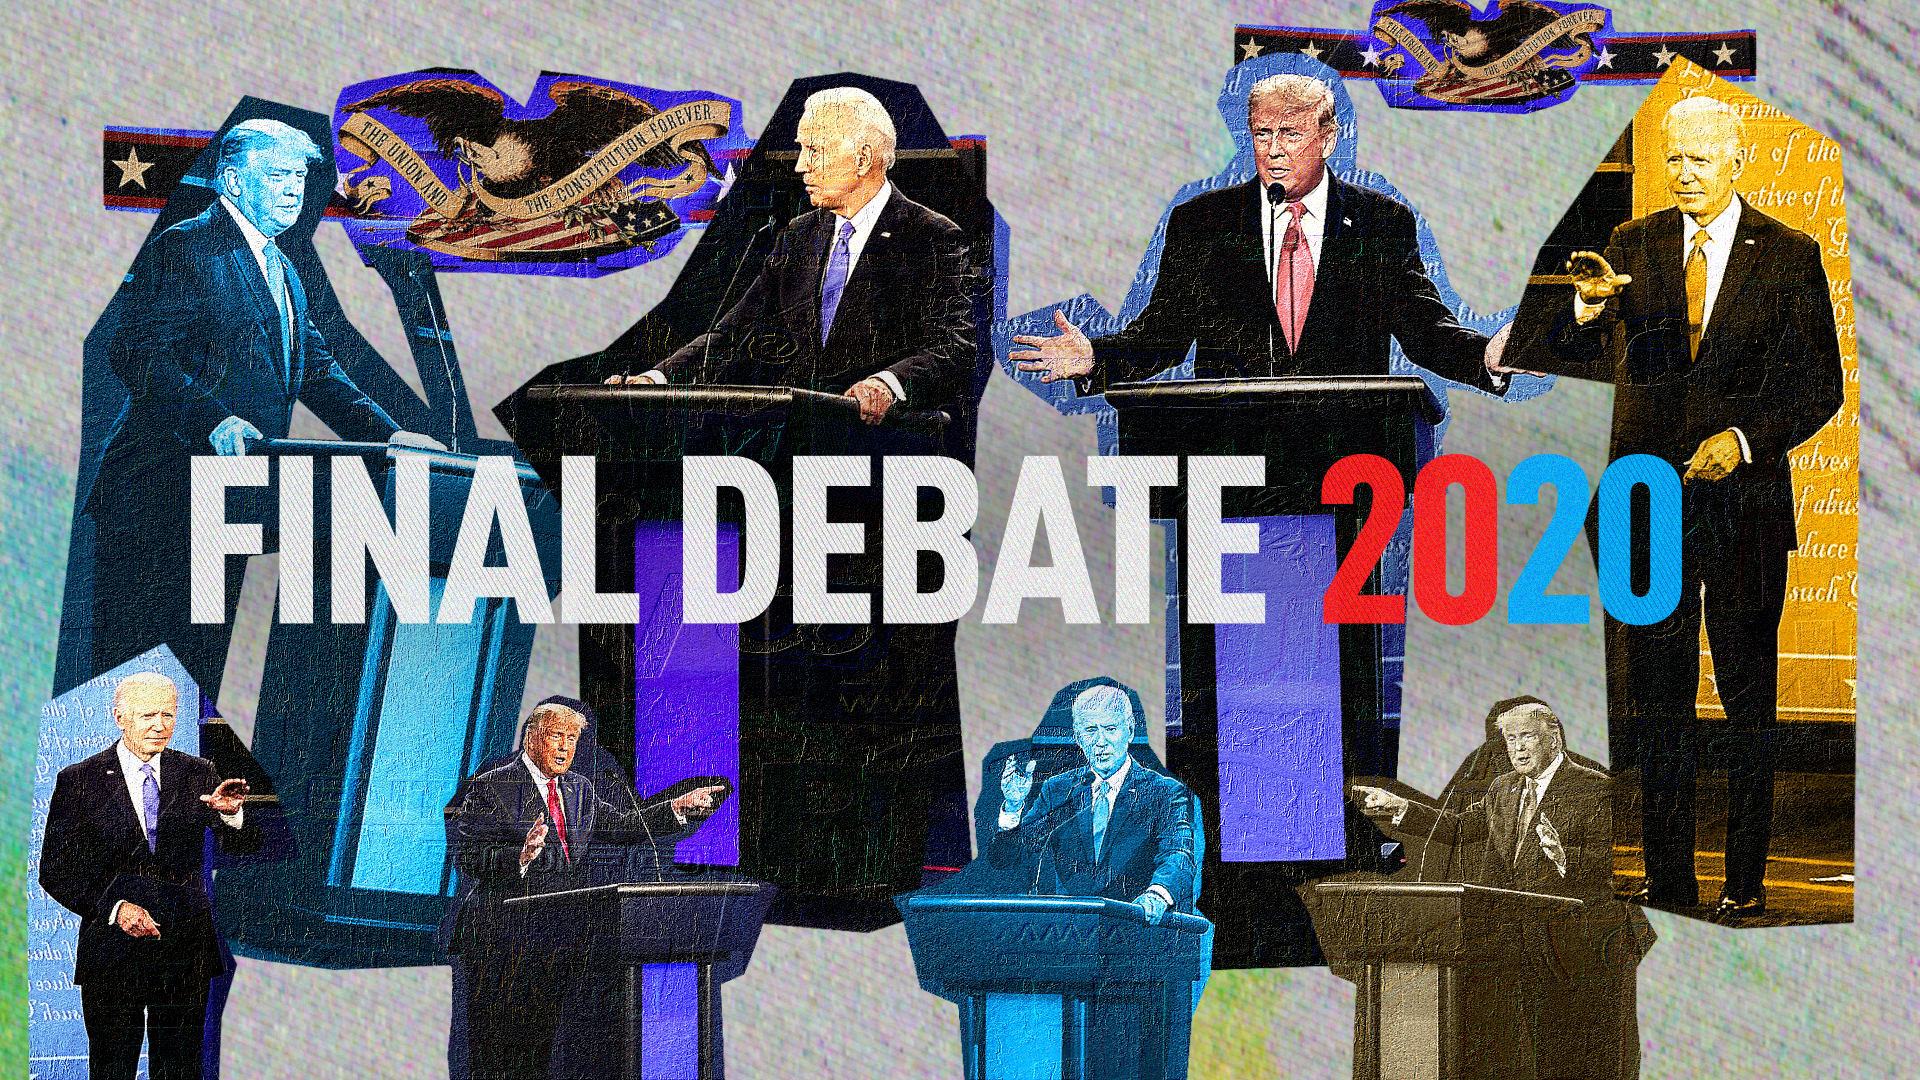 Must-See Moments from the Final Presidential Debate